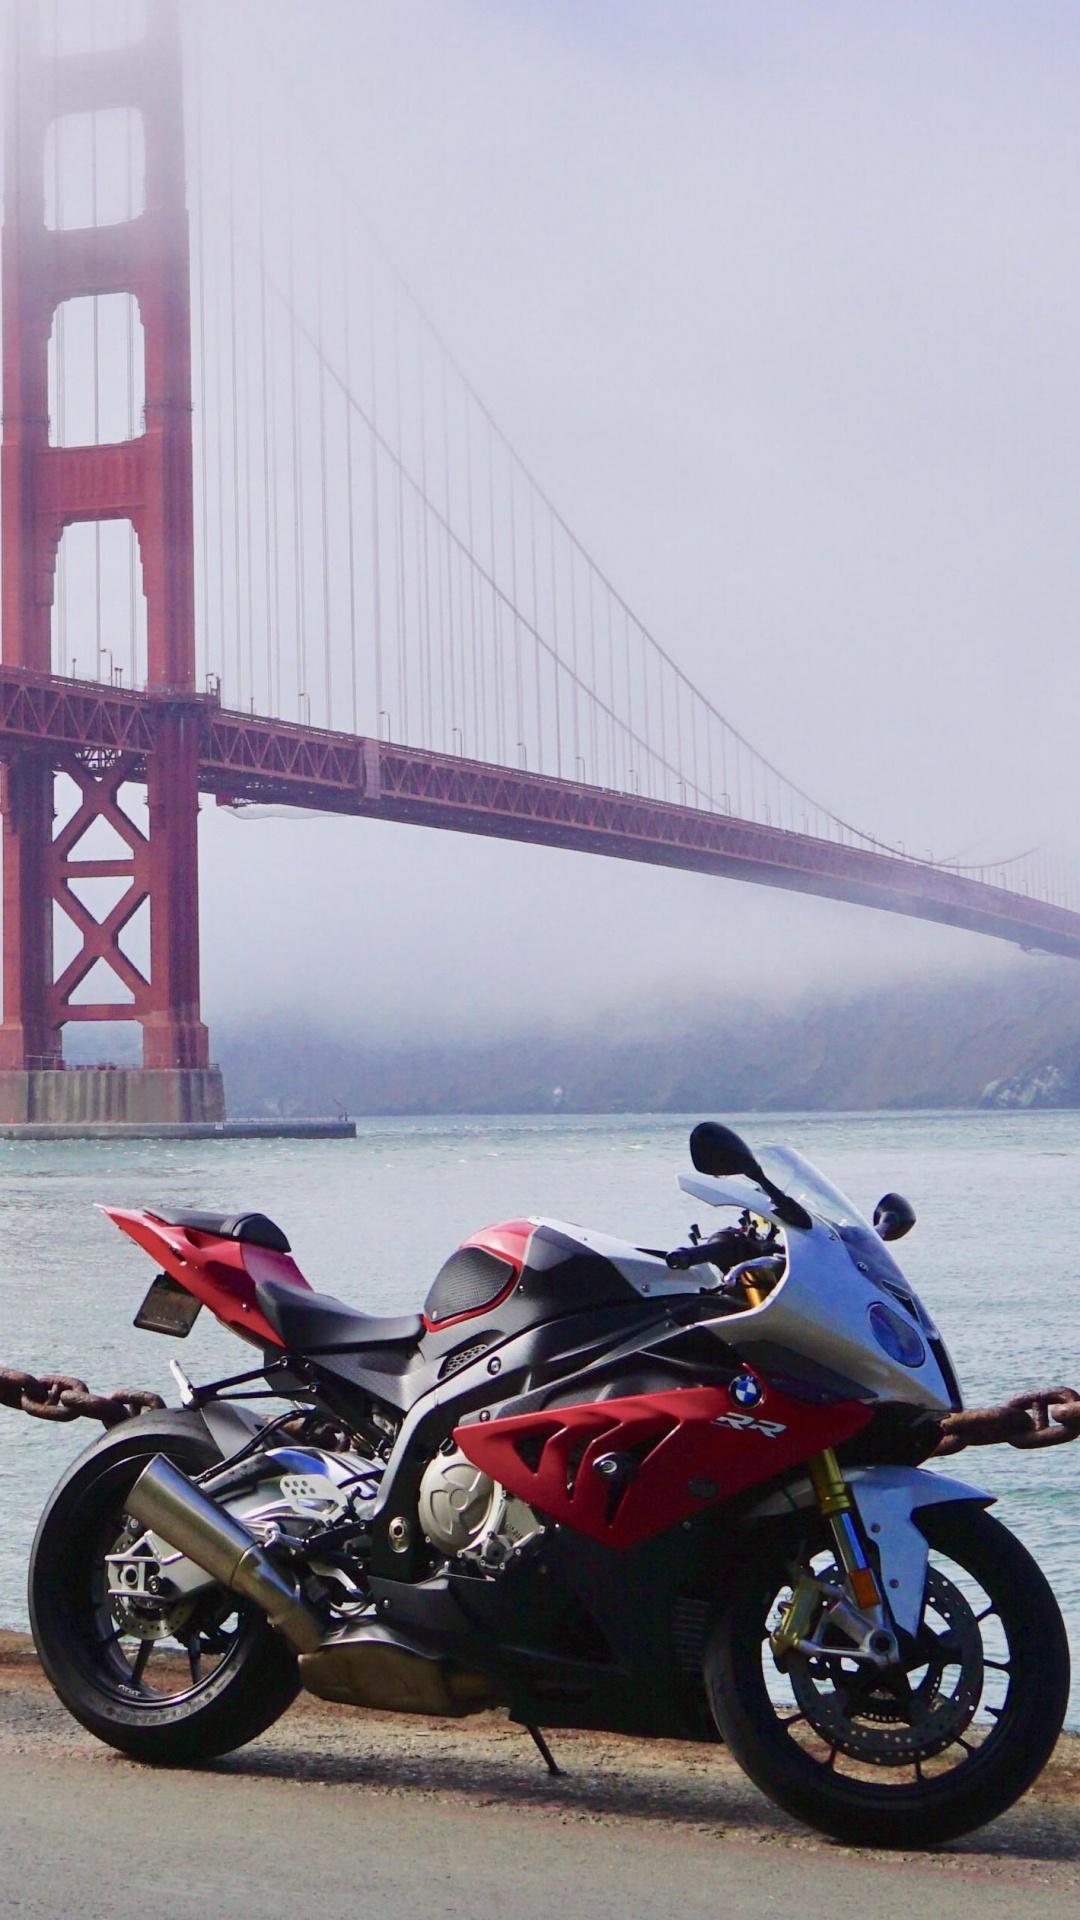 Red and Black Motorcycle Near Golden Gate Bridge. Wallpaper in 1080x1920 Resolution